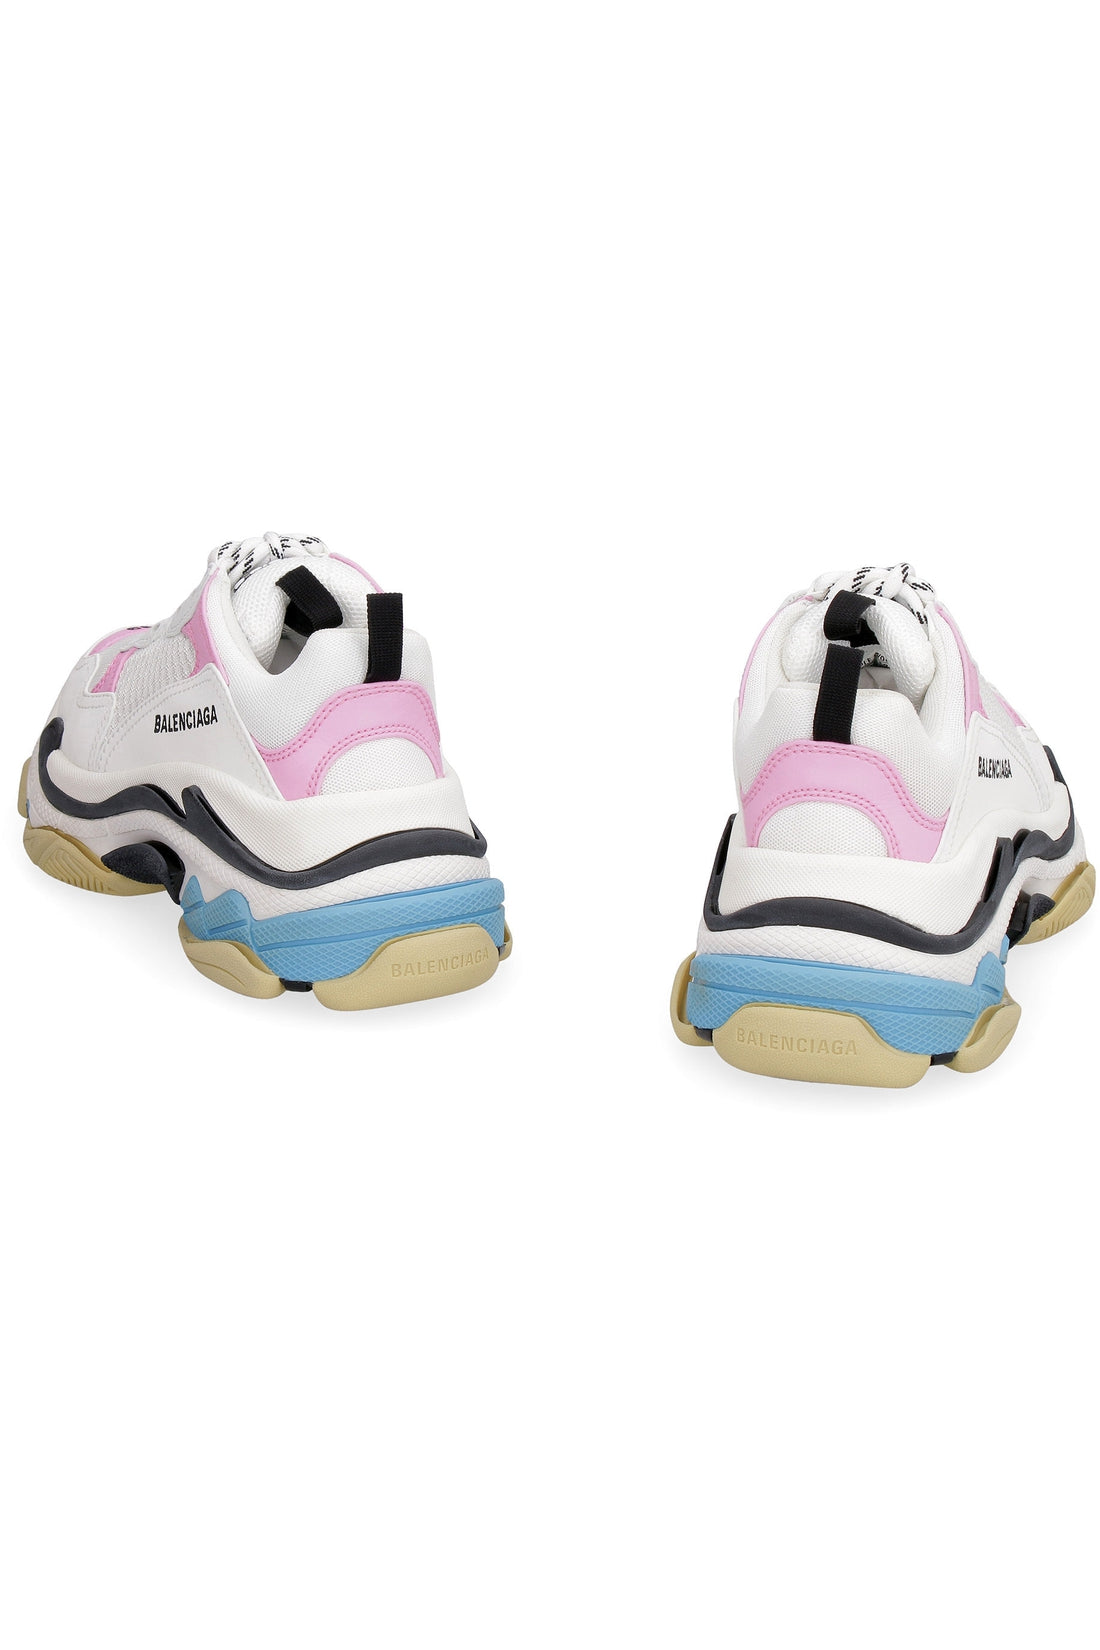 Balenciaga-OUTLET-SALE-Triple S chunky sneakers-ARCHIVIST